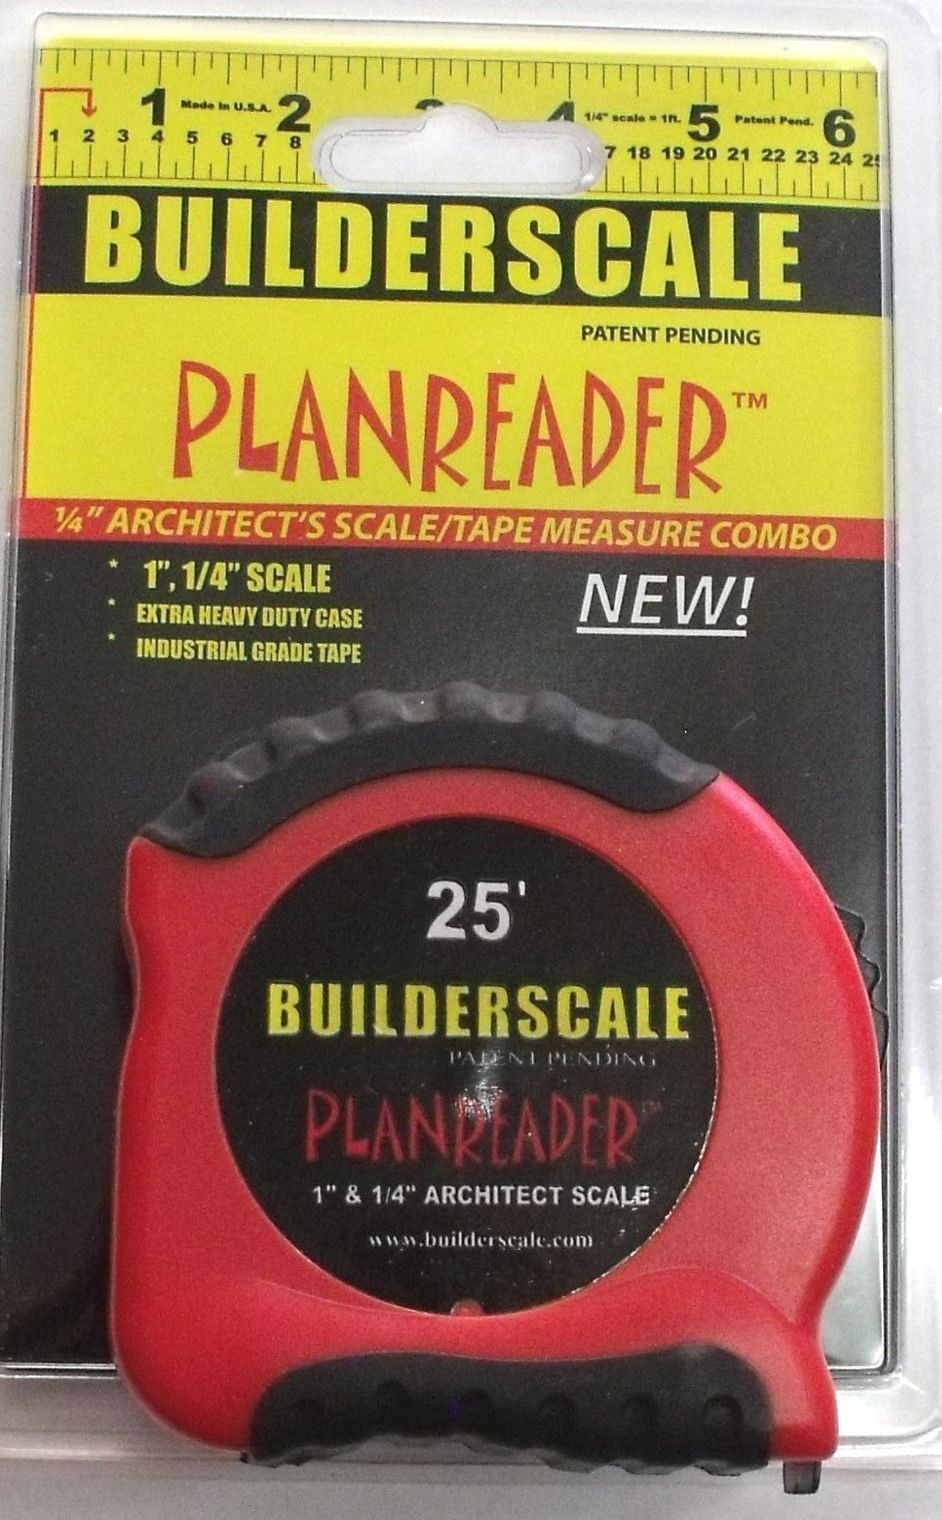 Builderscale 52625 Planreader 25' Tape Measure and 1" & 1/4" Architect Scale USA